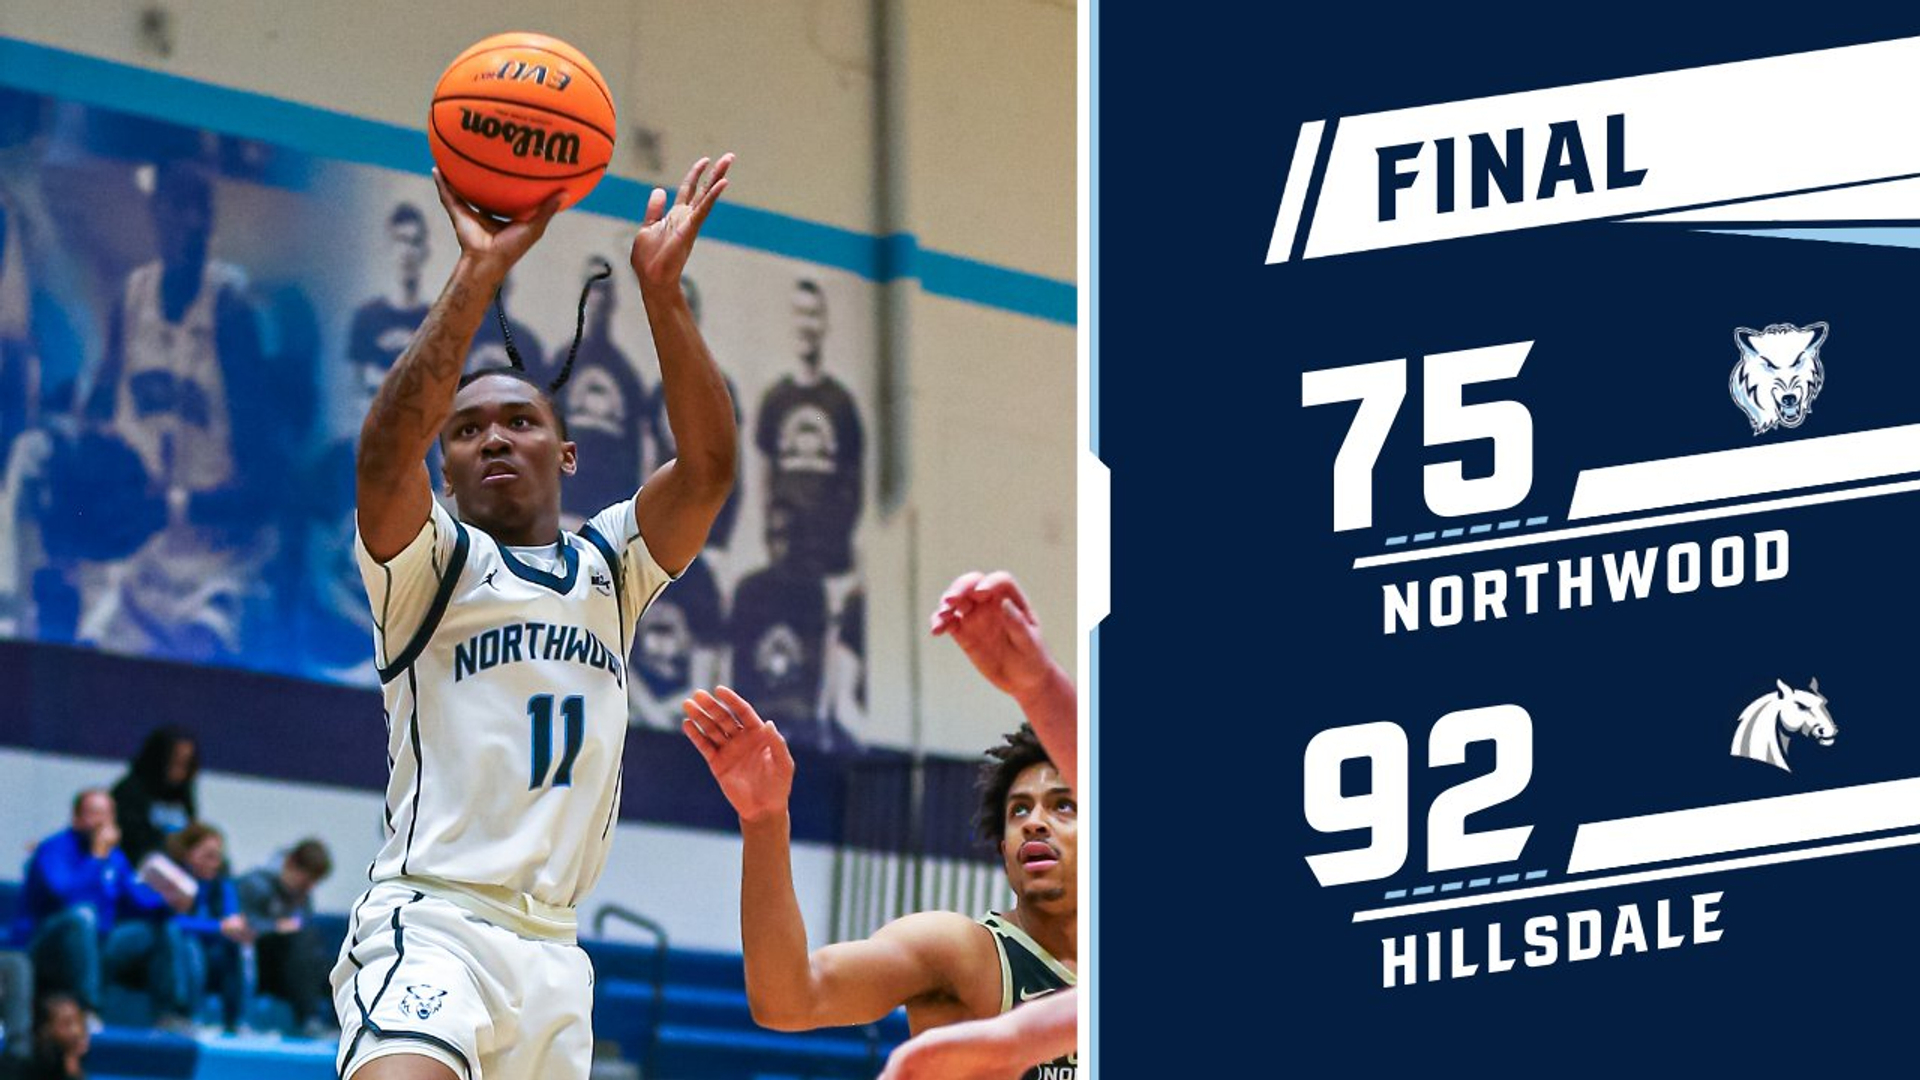 Men's Basketball Loses At Hillsdale 92-75